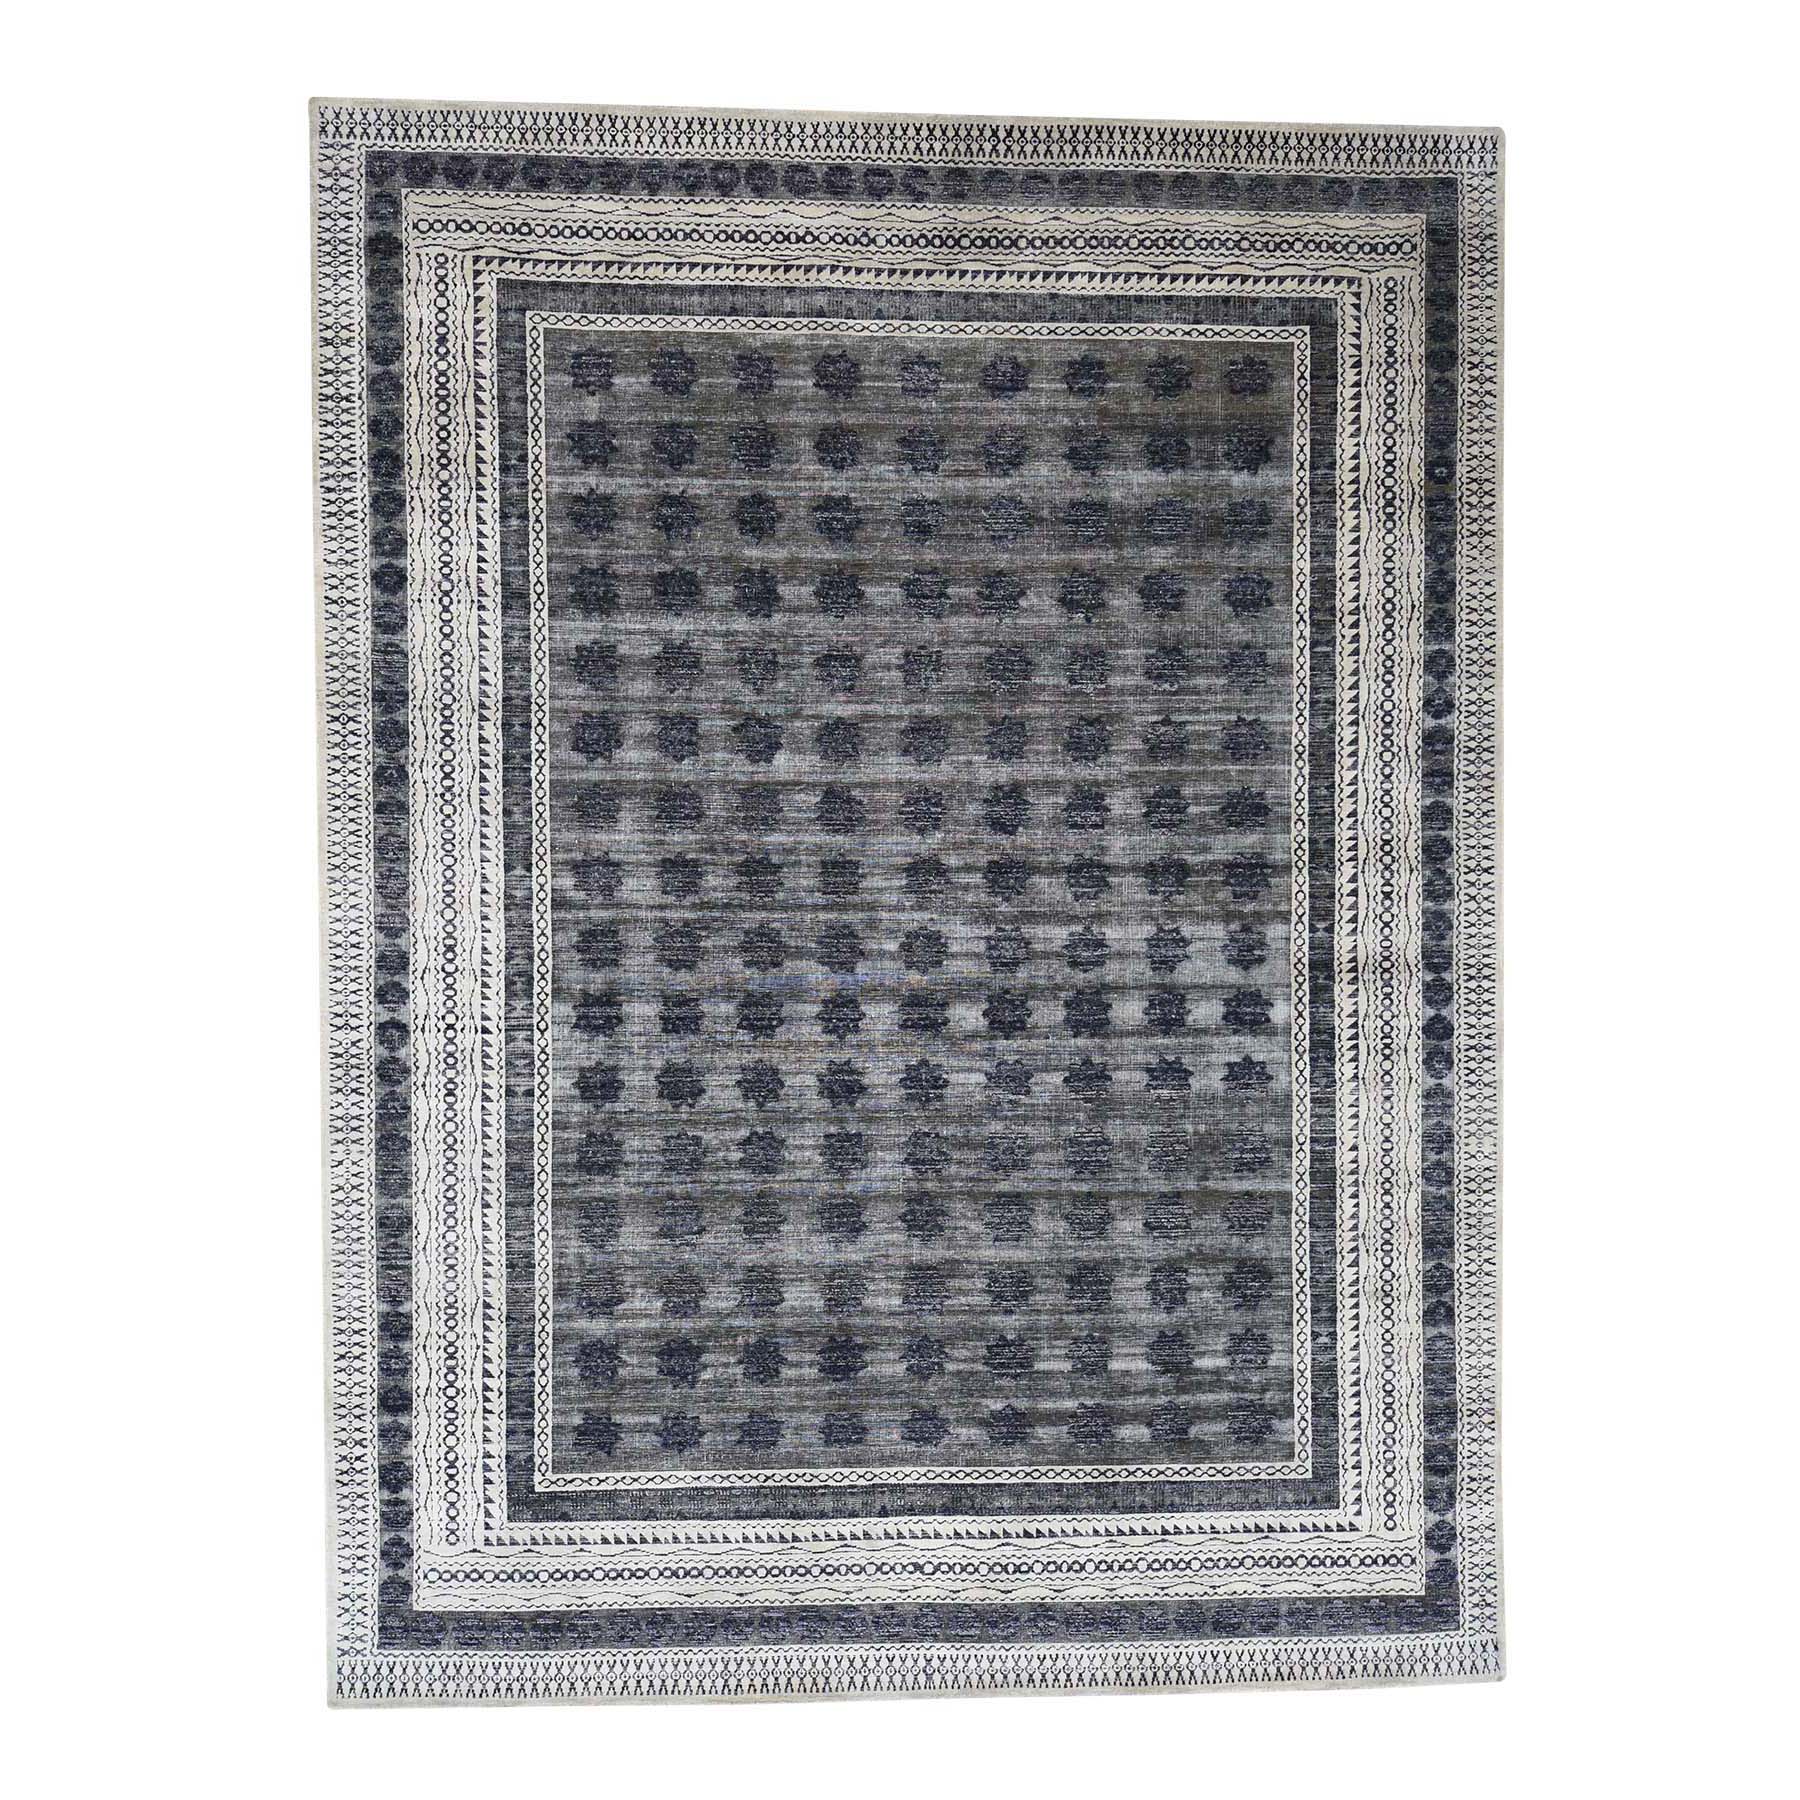 9'x12' Hand Woven Silk with Textured Wool Repetitive Design Oriental Rug 